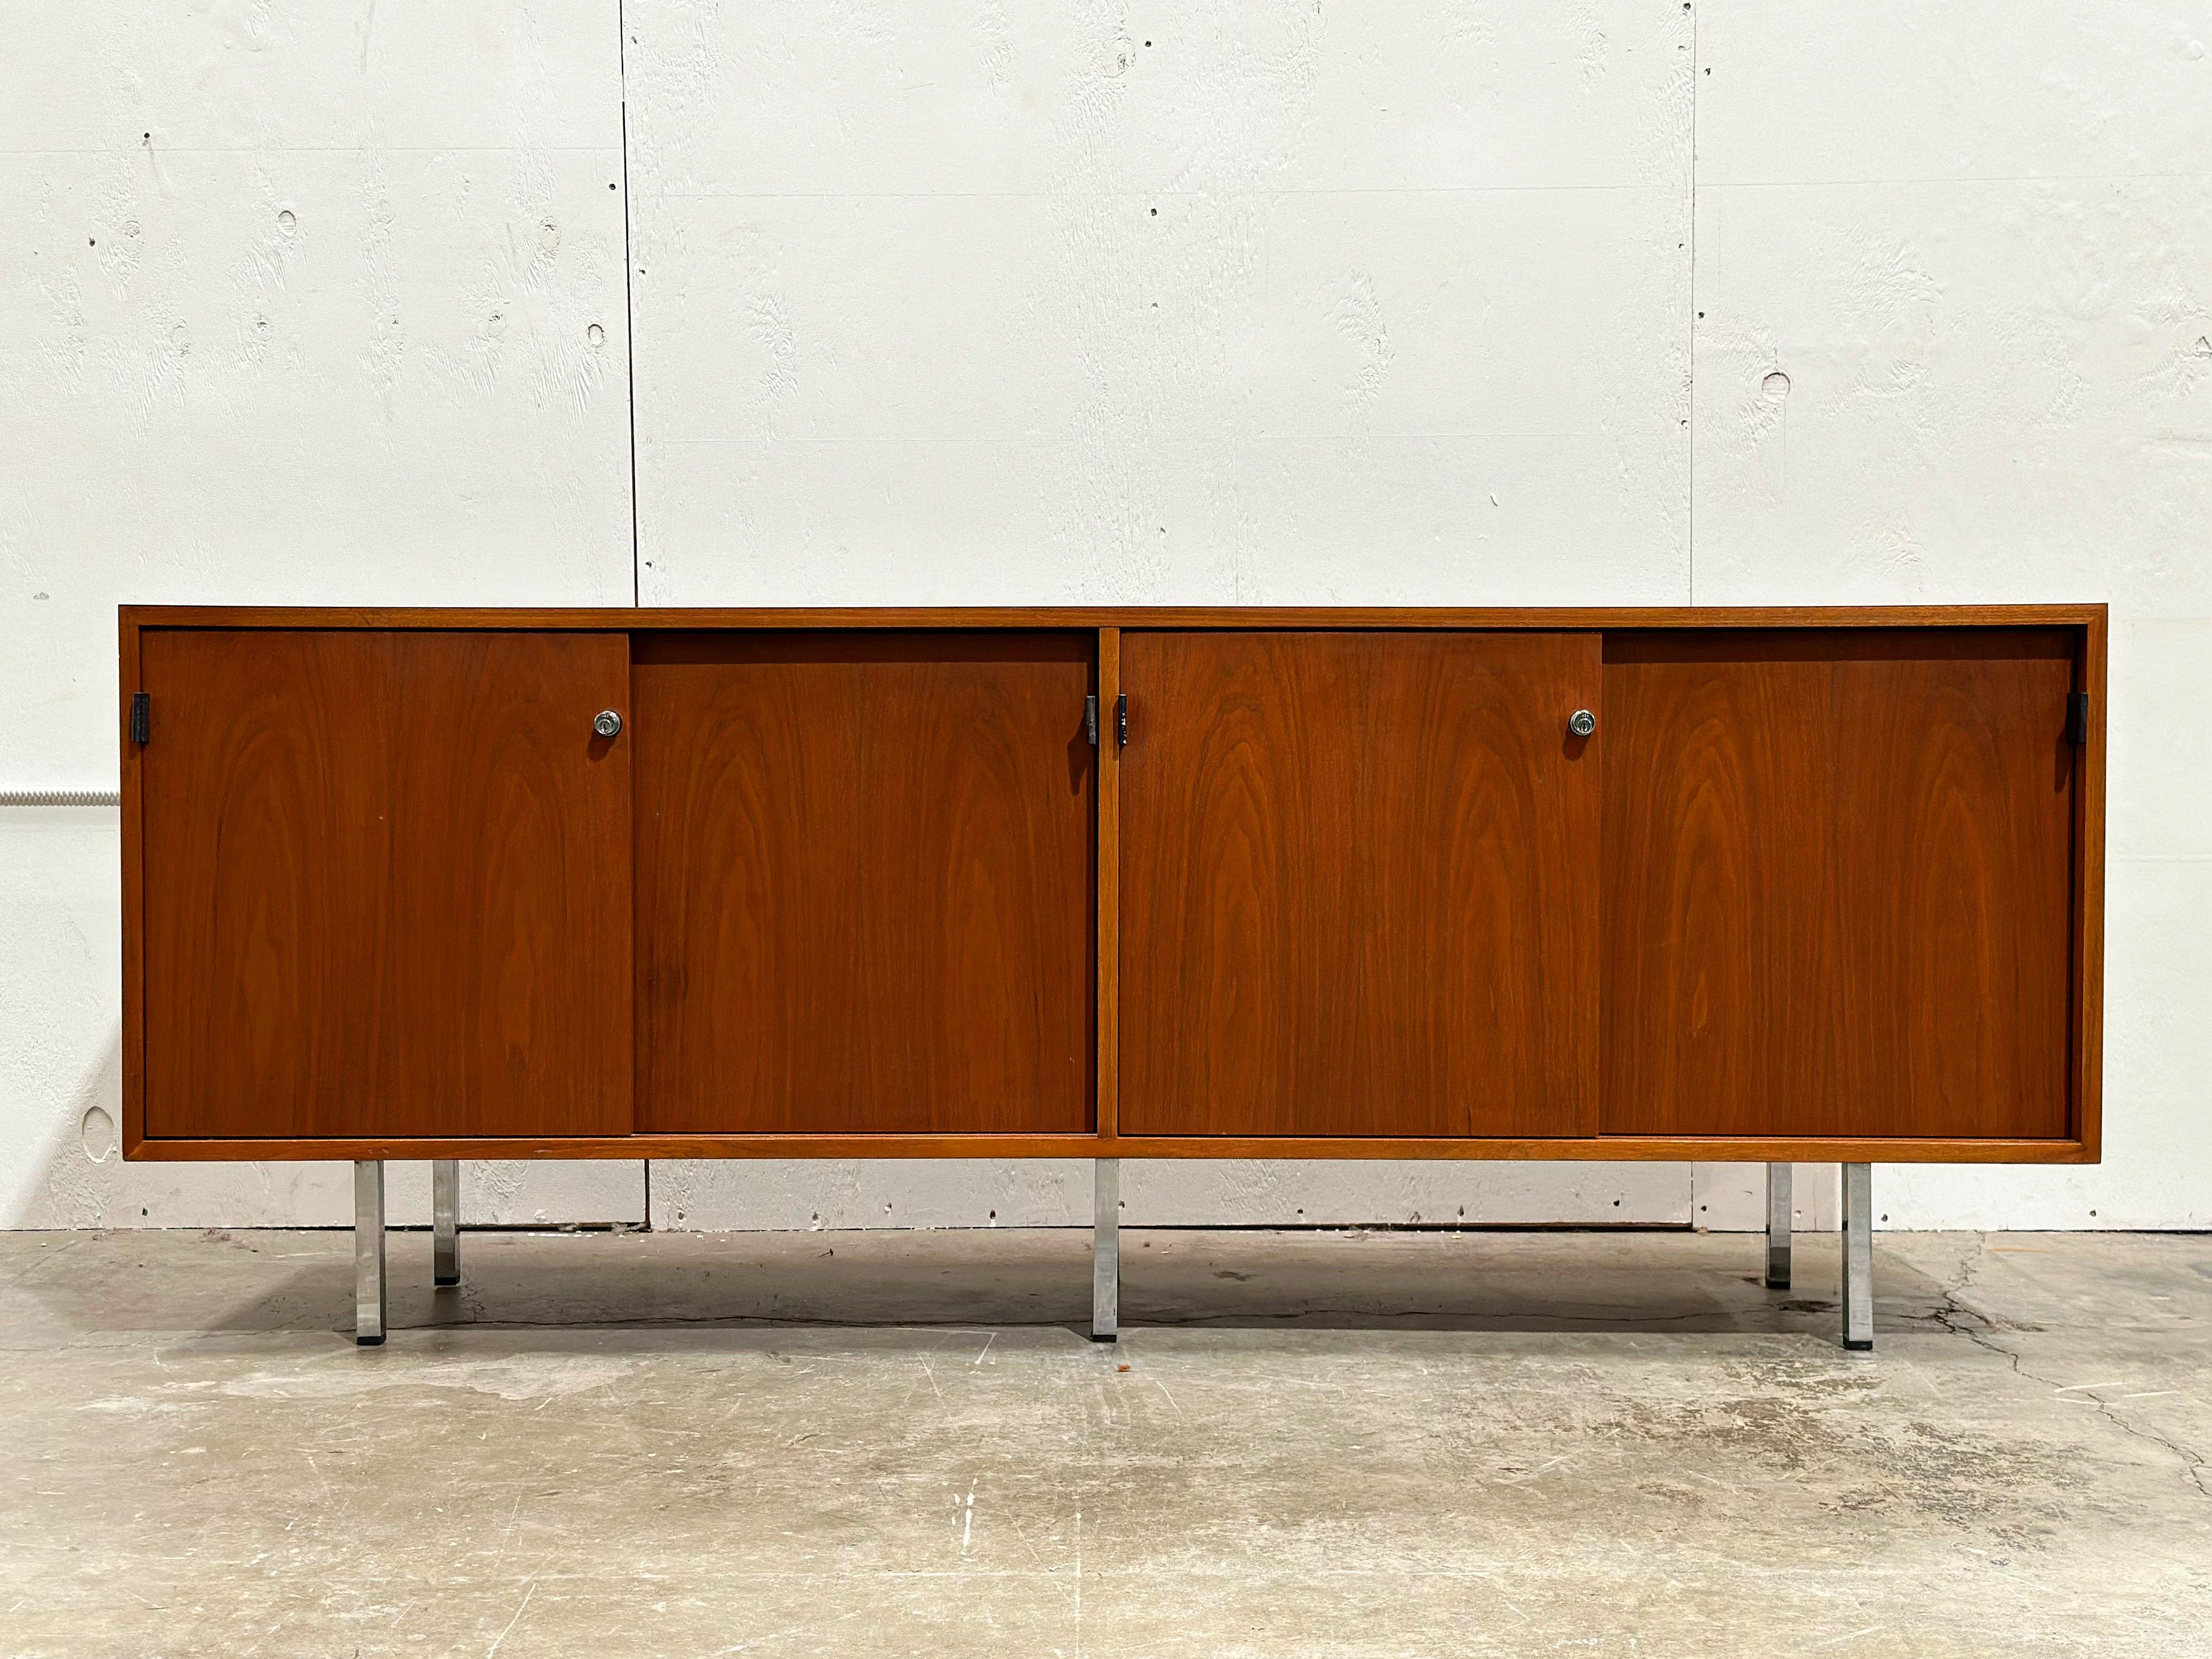 Mid Century Modern credenza by Florence Knoll for Knoll International, circa 1960s.
Walnut case with a walnut tone laminate top, chromed steel legs, black leather pulls and a white oak interior.
Excellent original condition with no flaws of note.